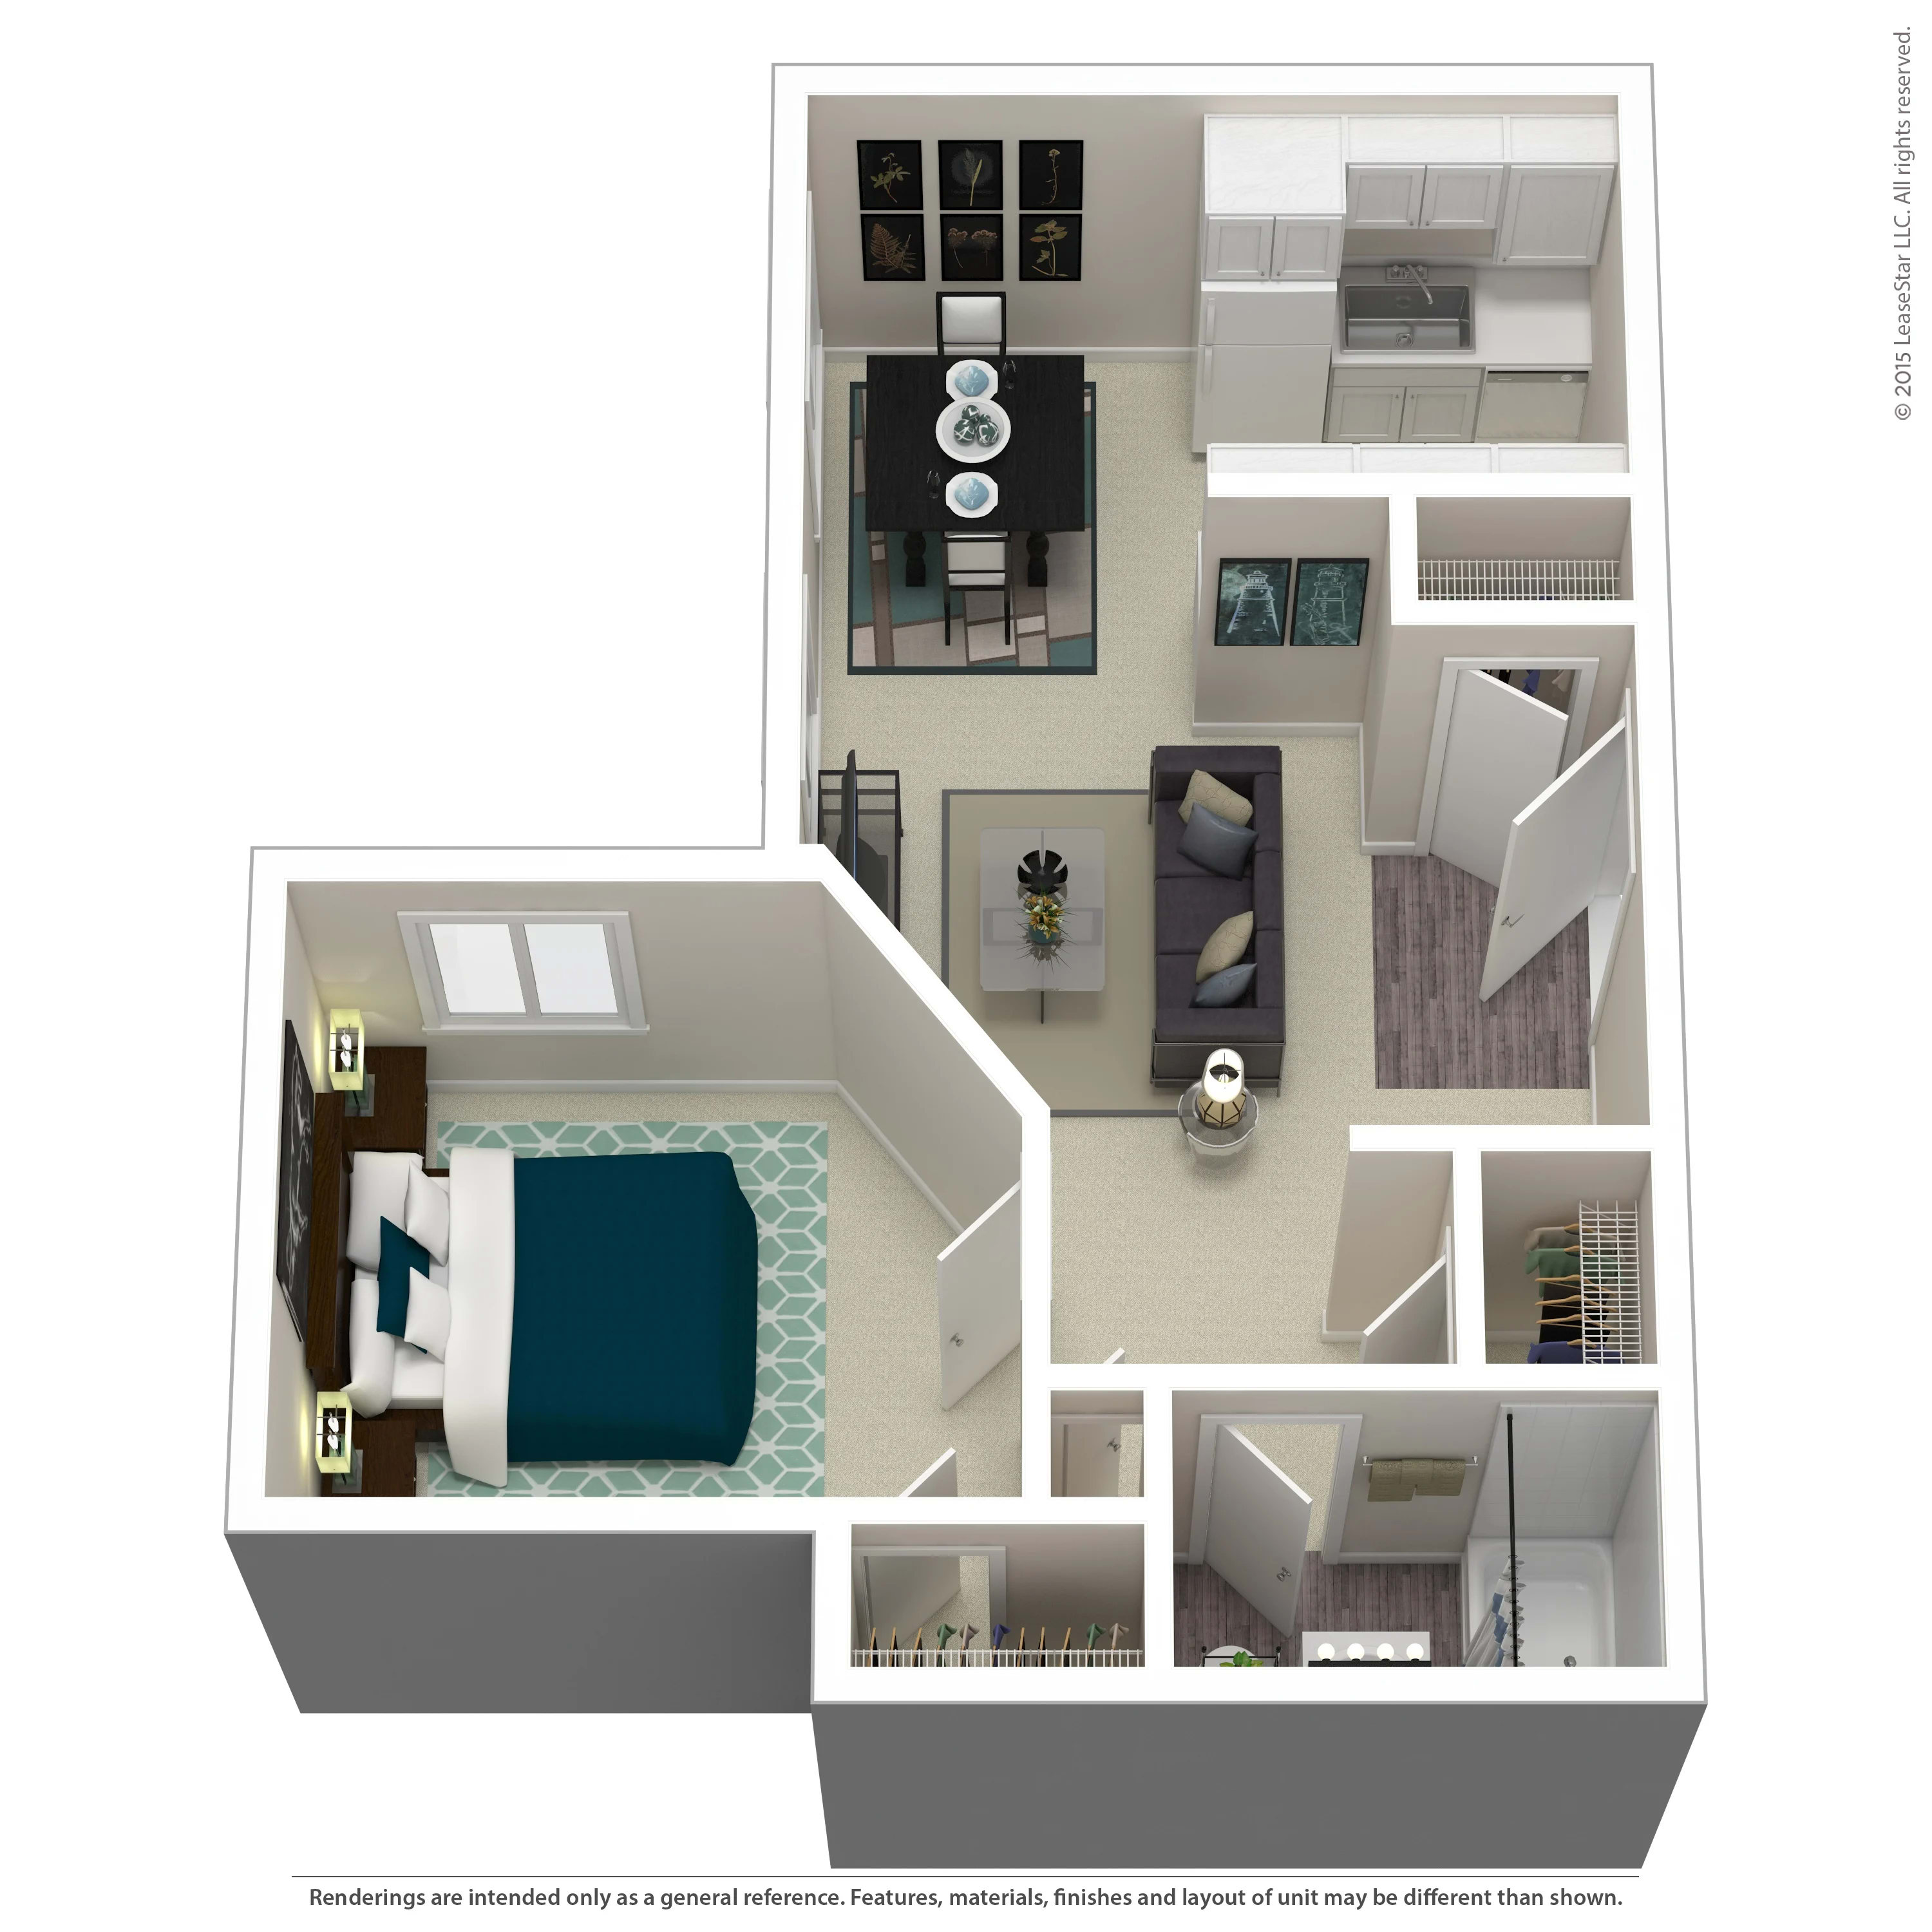 RESIDENCE 3, 1 BED, 1 BATH, 565 Square feet